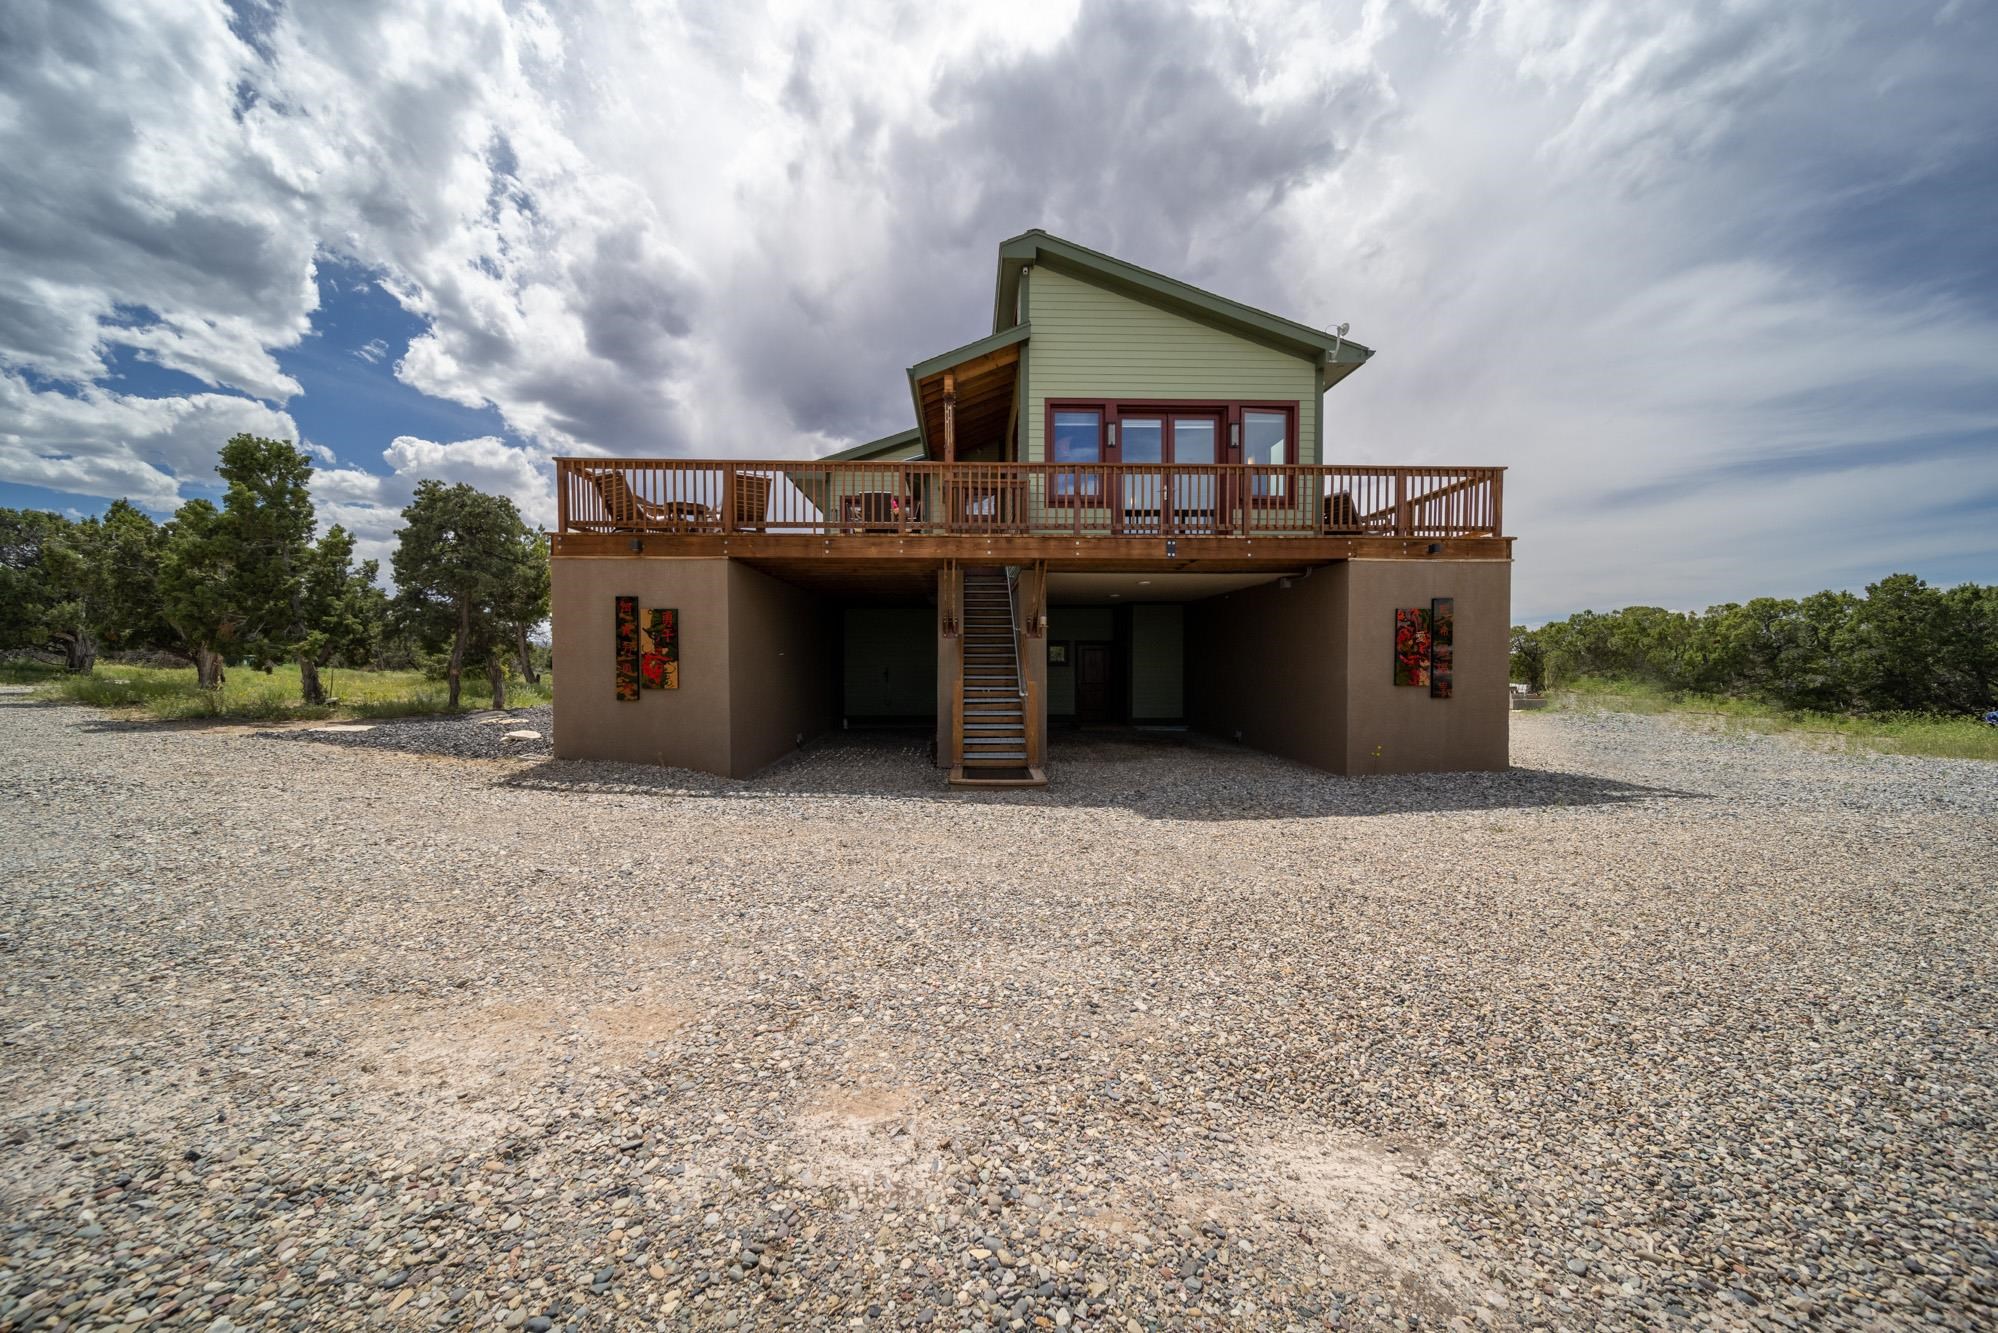 Welcome to Isle in the Sky!! A beautiful 30-minute drive from Grand Junction, CO. There are so many unbelievable features to this property you will need to see to truly understand and appreciate. Please reach out to get a full list of details on this property, including plans to add additional living space in garage/shop. As you enter the drive up to the home you will pass a large meadow that Elk love to visit. This meadow will also accommodate St. Mary's Flight for Life Helicopter that could be to you within 5 mins to rescue if needed. This home was built over 8 years, the majority of it completed in 2023. The designers of the home took the approach of bringing the outdoors in! You will notice this with large windows throughout, vaulted ceiling and ideally placed French doors. Living space and studio is on the 2nd floor with 360-degree panoramic views. Elevator, which will accommodate electric wheelchair, ensures that everyone will be able to enjoy this home. Just some of our favorite features are beautiful quartz counter tops from Peru, stunning rock wall with lit niches, live edge wood framing, hanging pendants wall sconces and decorative lights throughout and stained concrete floors with radiant heating. Don't miss the custom designed portable island complete with locking casters to match the kitchen. Attention to detail and efficiency of space is seen throughout this home. Raised wrap around deck gives you space to entertain with hot tub, fire pit (piped to propane tank), grill (also piped to propane) and enjoy the views. Property features a 4-bay shop/garage complete with a "cleanroom", half bath and small office where security system connects. Advanced state-of-the-art technical equipment runs this home (please call for list). Surge protector at electrical box cleans power before entering the home. Wiring and plumbing are fished through conduit. Exterior has an outdoor shower with both hot and cold. RV hook up and parking also in place with 220 electrical from shop. Well, cistern and septic were all designed large enough to accommodate another home to be built on the property. Endless potential with this unique retreat!